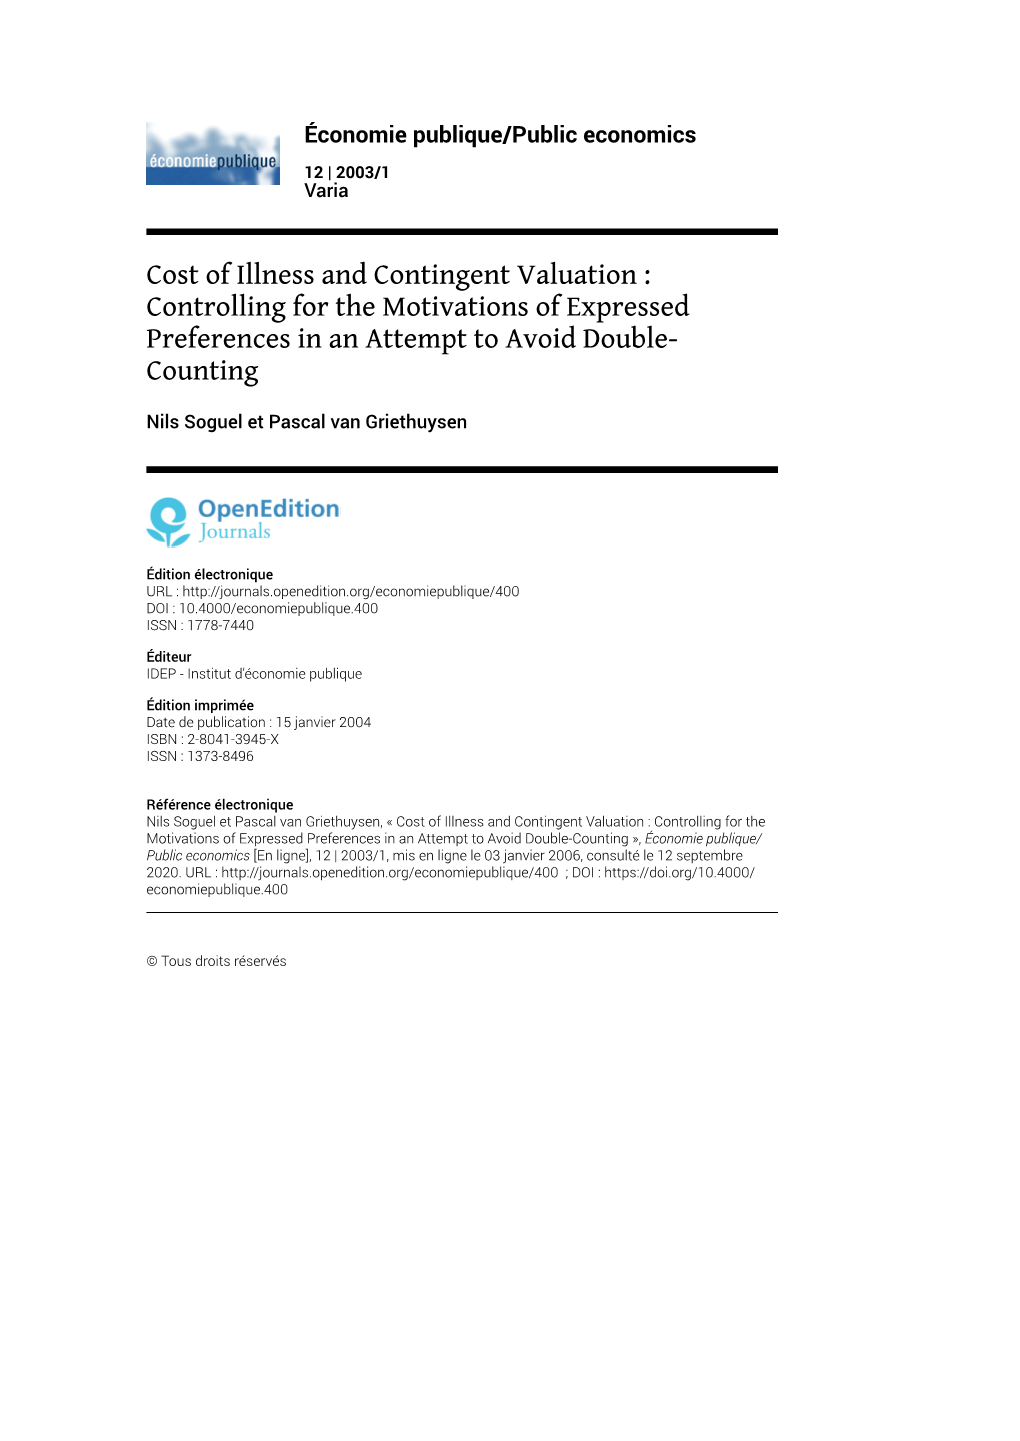 Cost of Illness and Contingent Valuation : Controlling for the Motivations of Expressed Preferences in an Attempt to Avoid Double- Counting